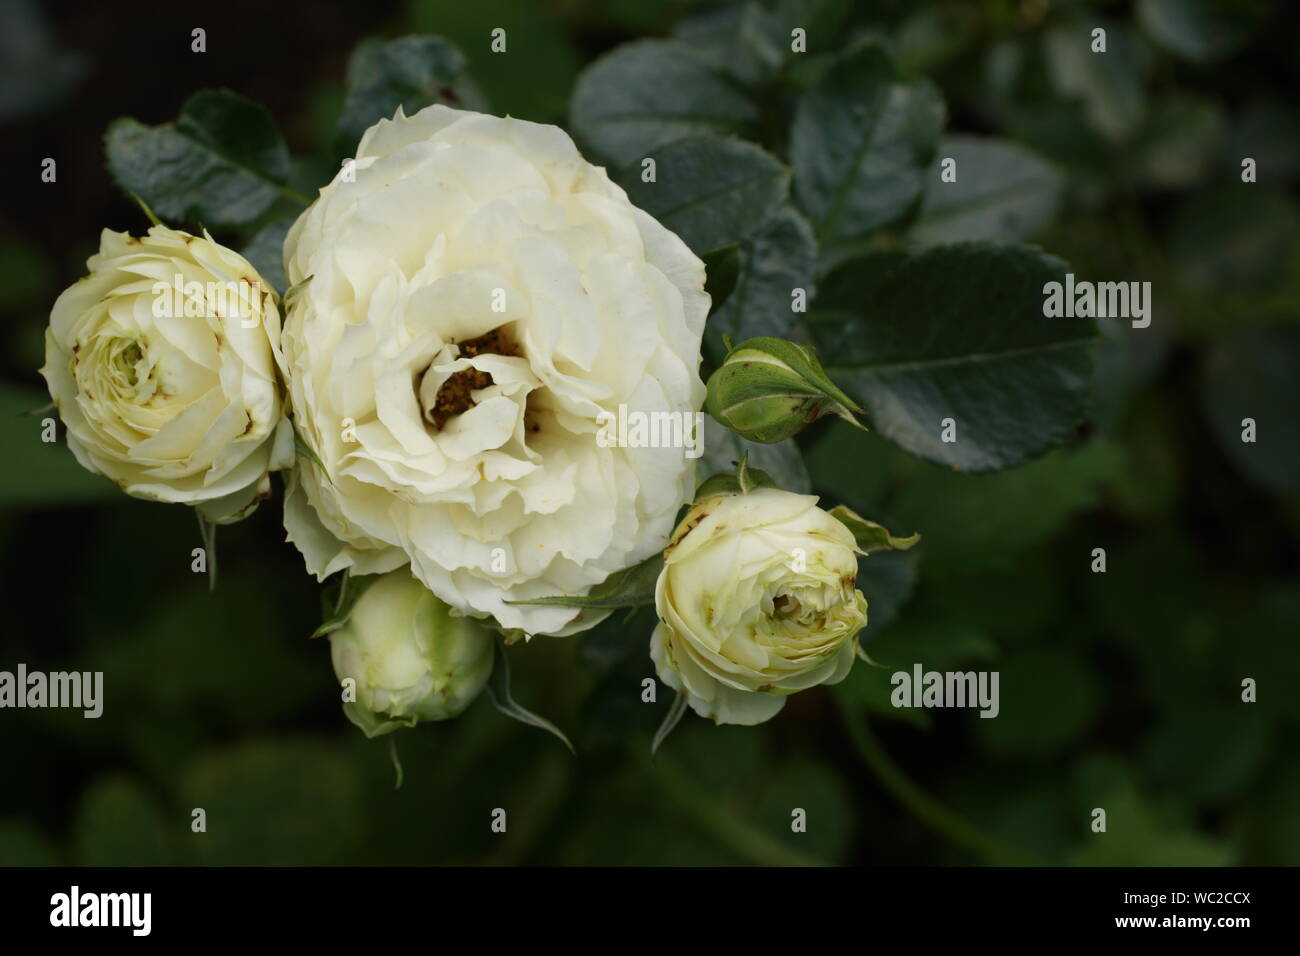 Lemon Rokoko beautiful creamy roses. Flowers in a garden in natural conditions among greenery, under the open sky. Stock Photo